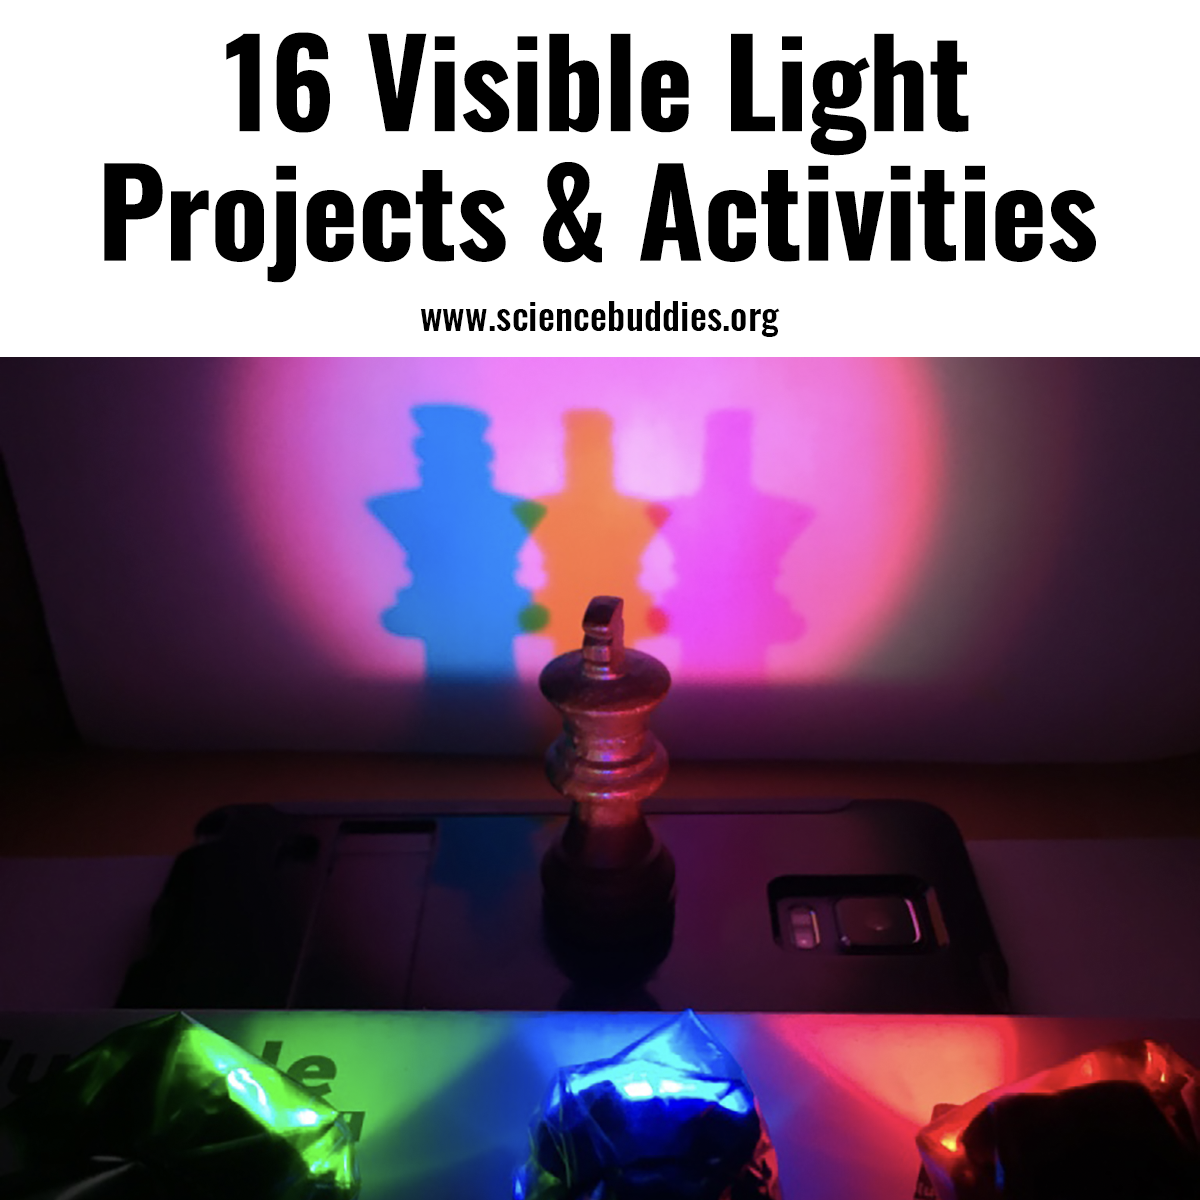 Visible Light Projects and Activities, including color and shadow science - part of Visible Light Collection at Science Buddies